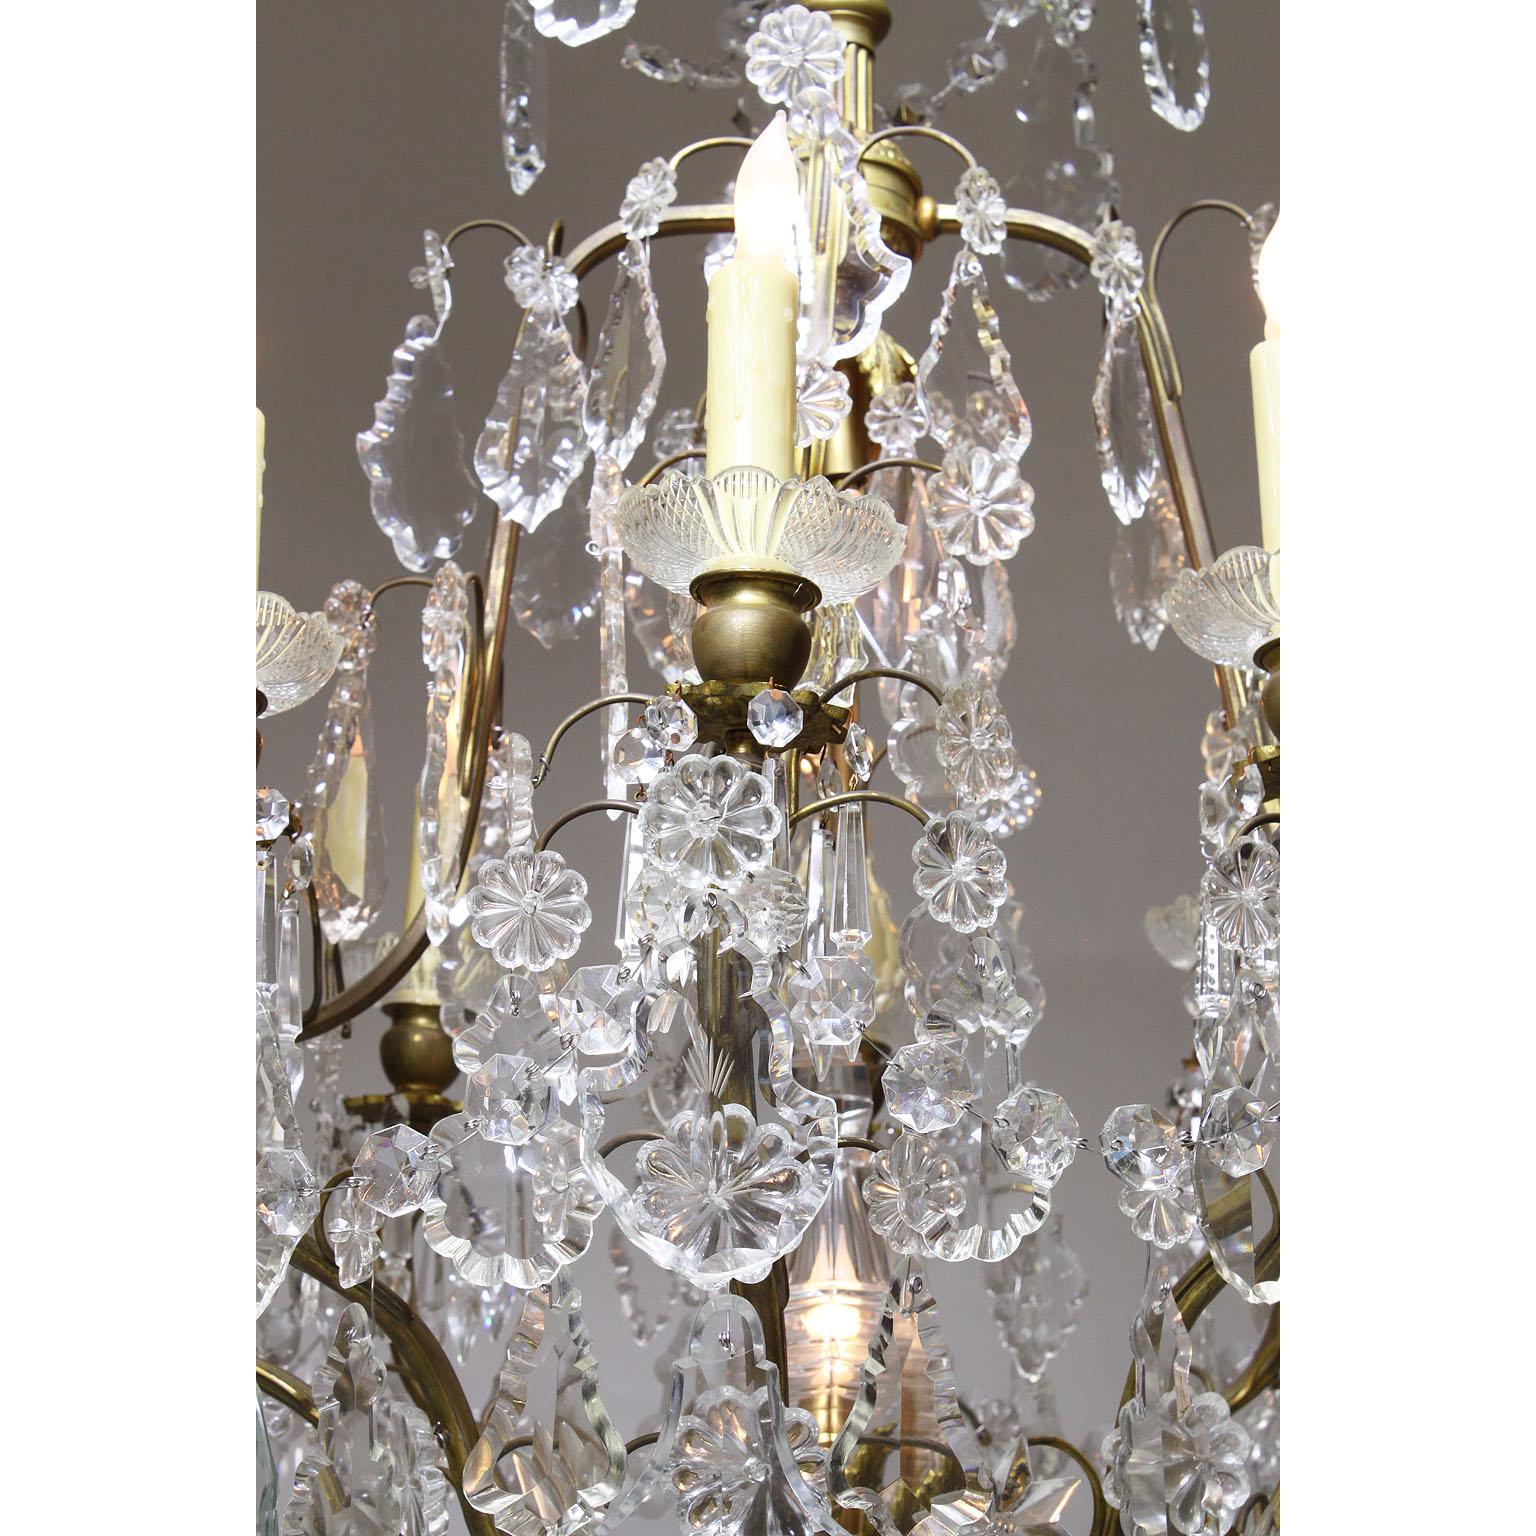 Early 20th Century French Louis XV Style Gilt-Metal and Cut-Glass 'Crystal' Ten-Light Chandelier For Sale